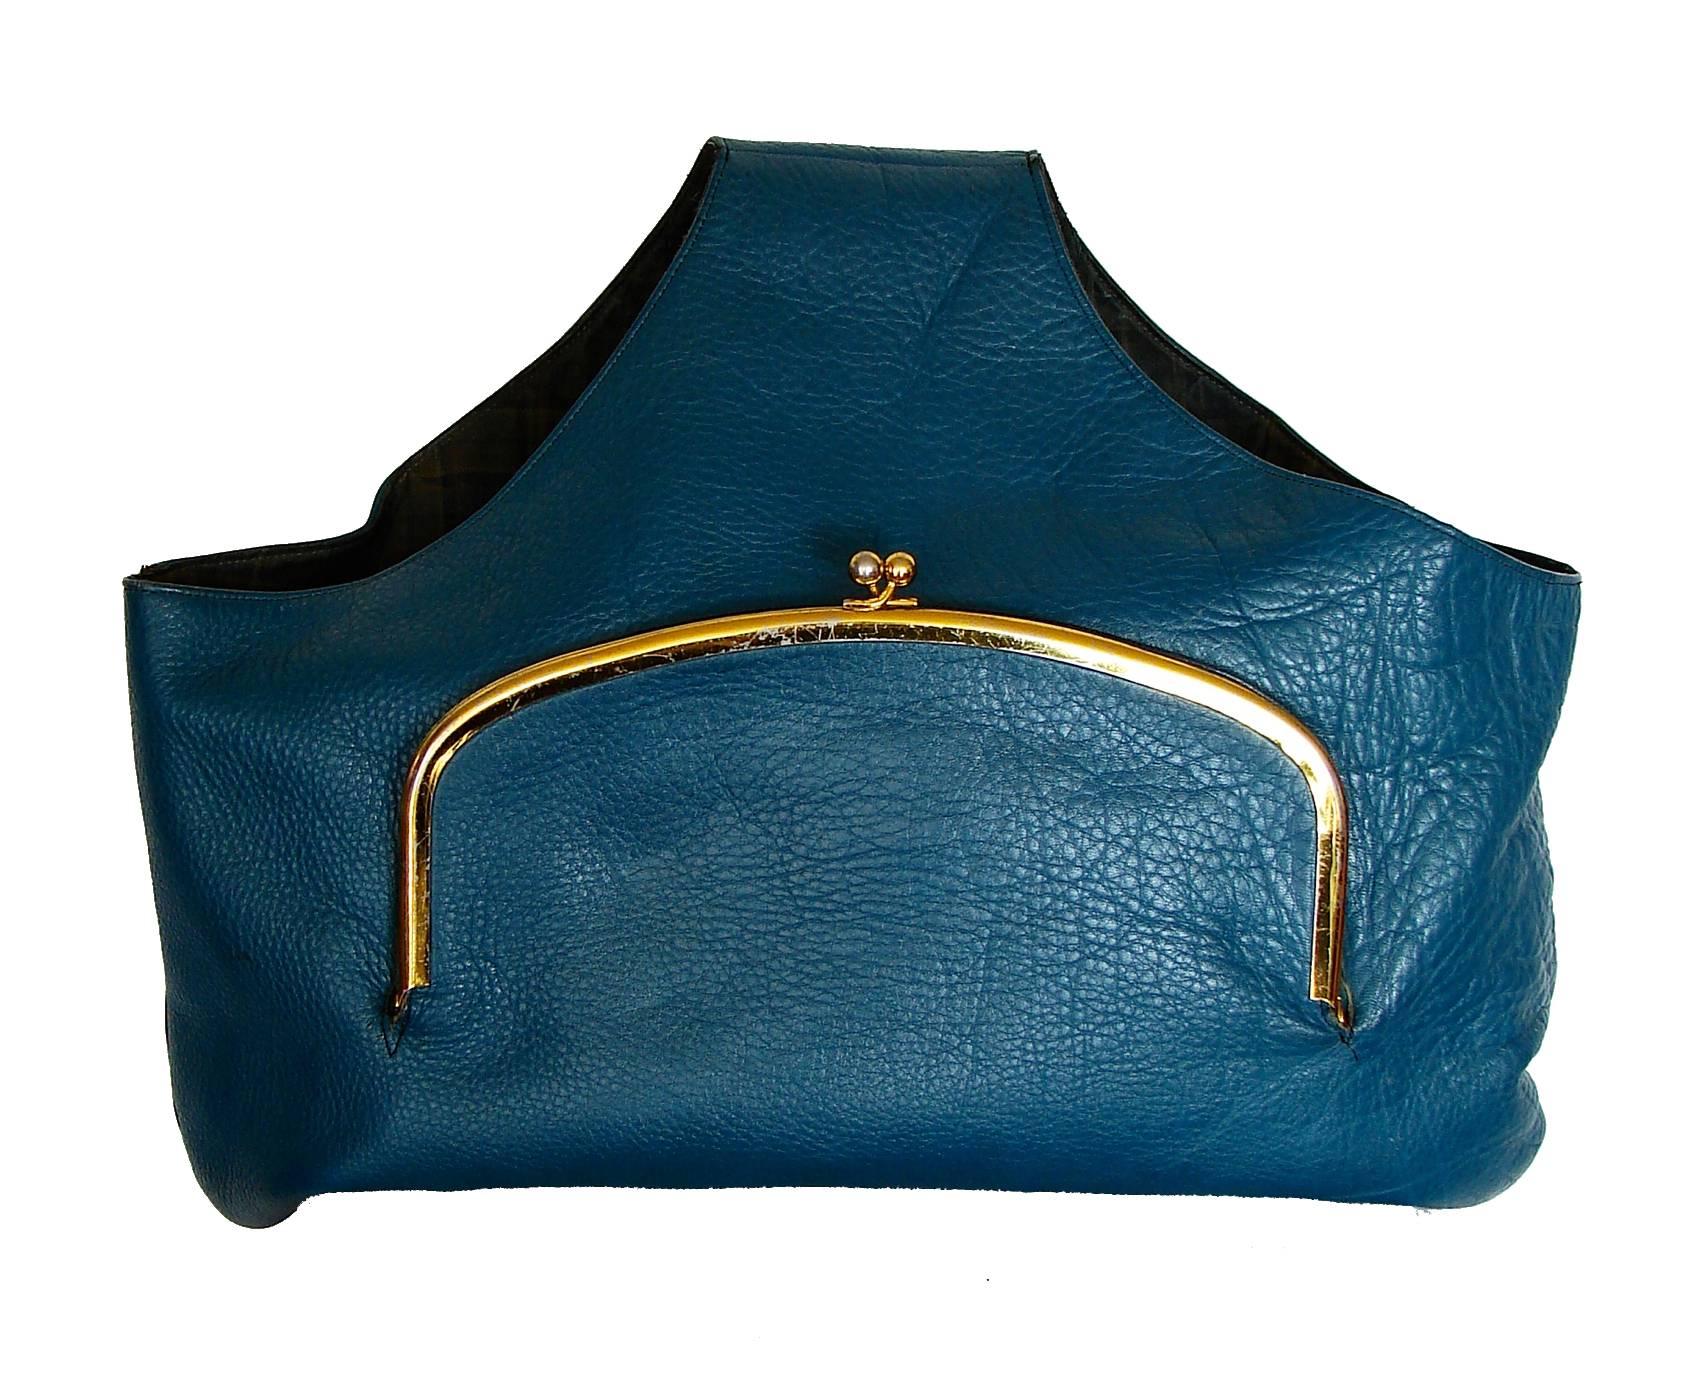 This fabulous tote bag was designed by Bonnie Cashin for Coach in NYC during the 1960s and reflects her practical yet stylish aesthetic.  Made from a vibrant "blueberry" blue leather, this bag features a large brass kiss lock pouch in